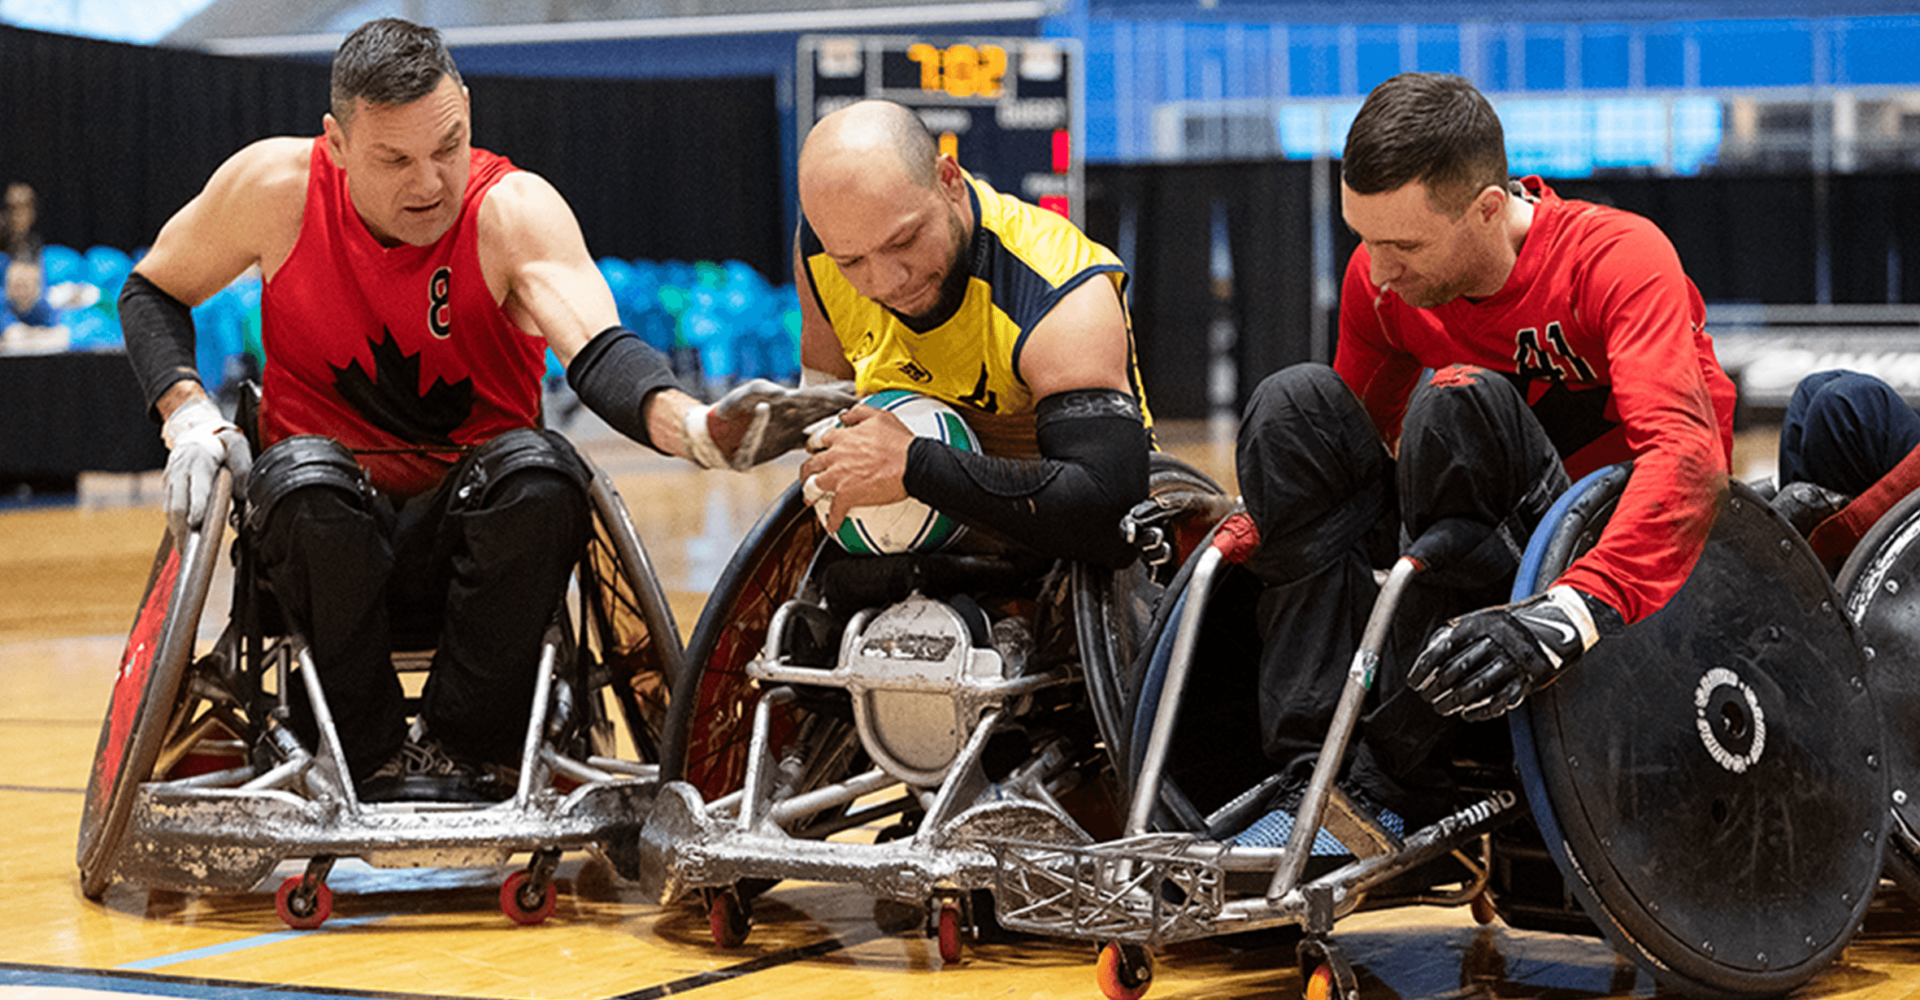 Documentary following Canadian wheelchair rugby team premieres